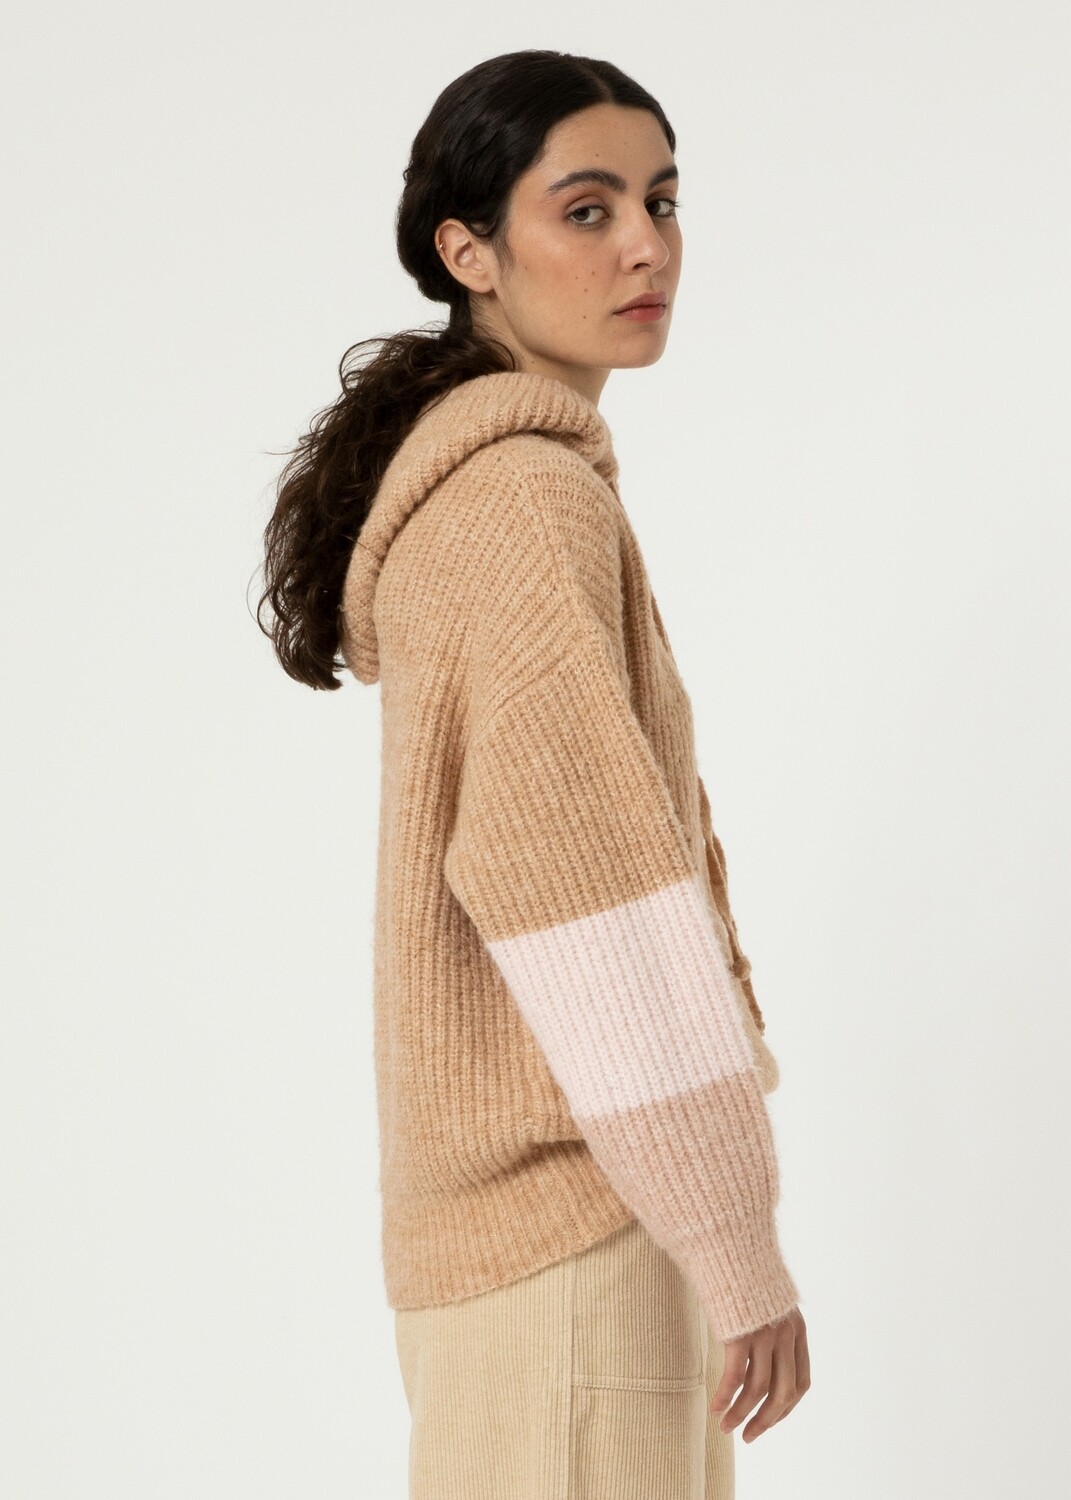 FRNCH - Leanne Pullover